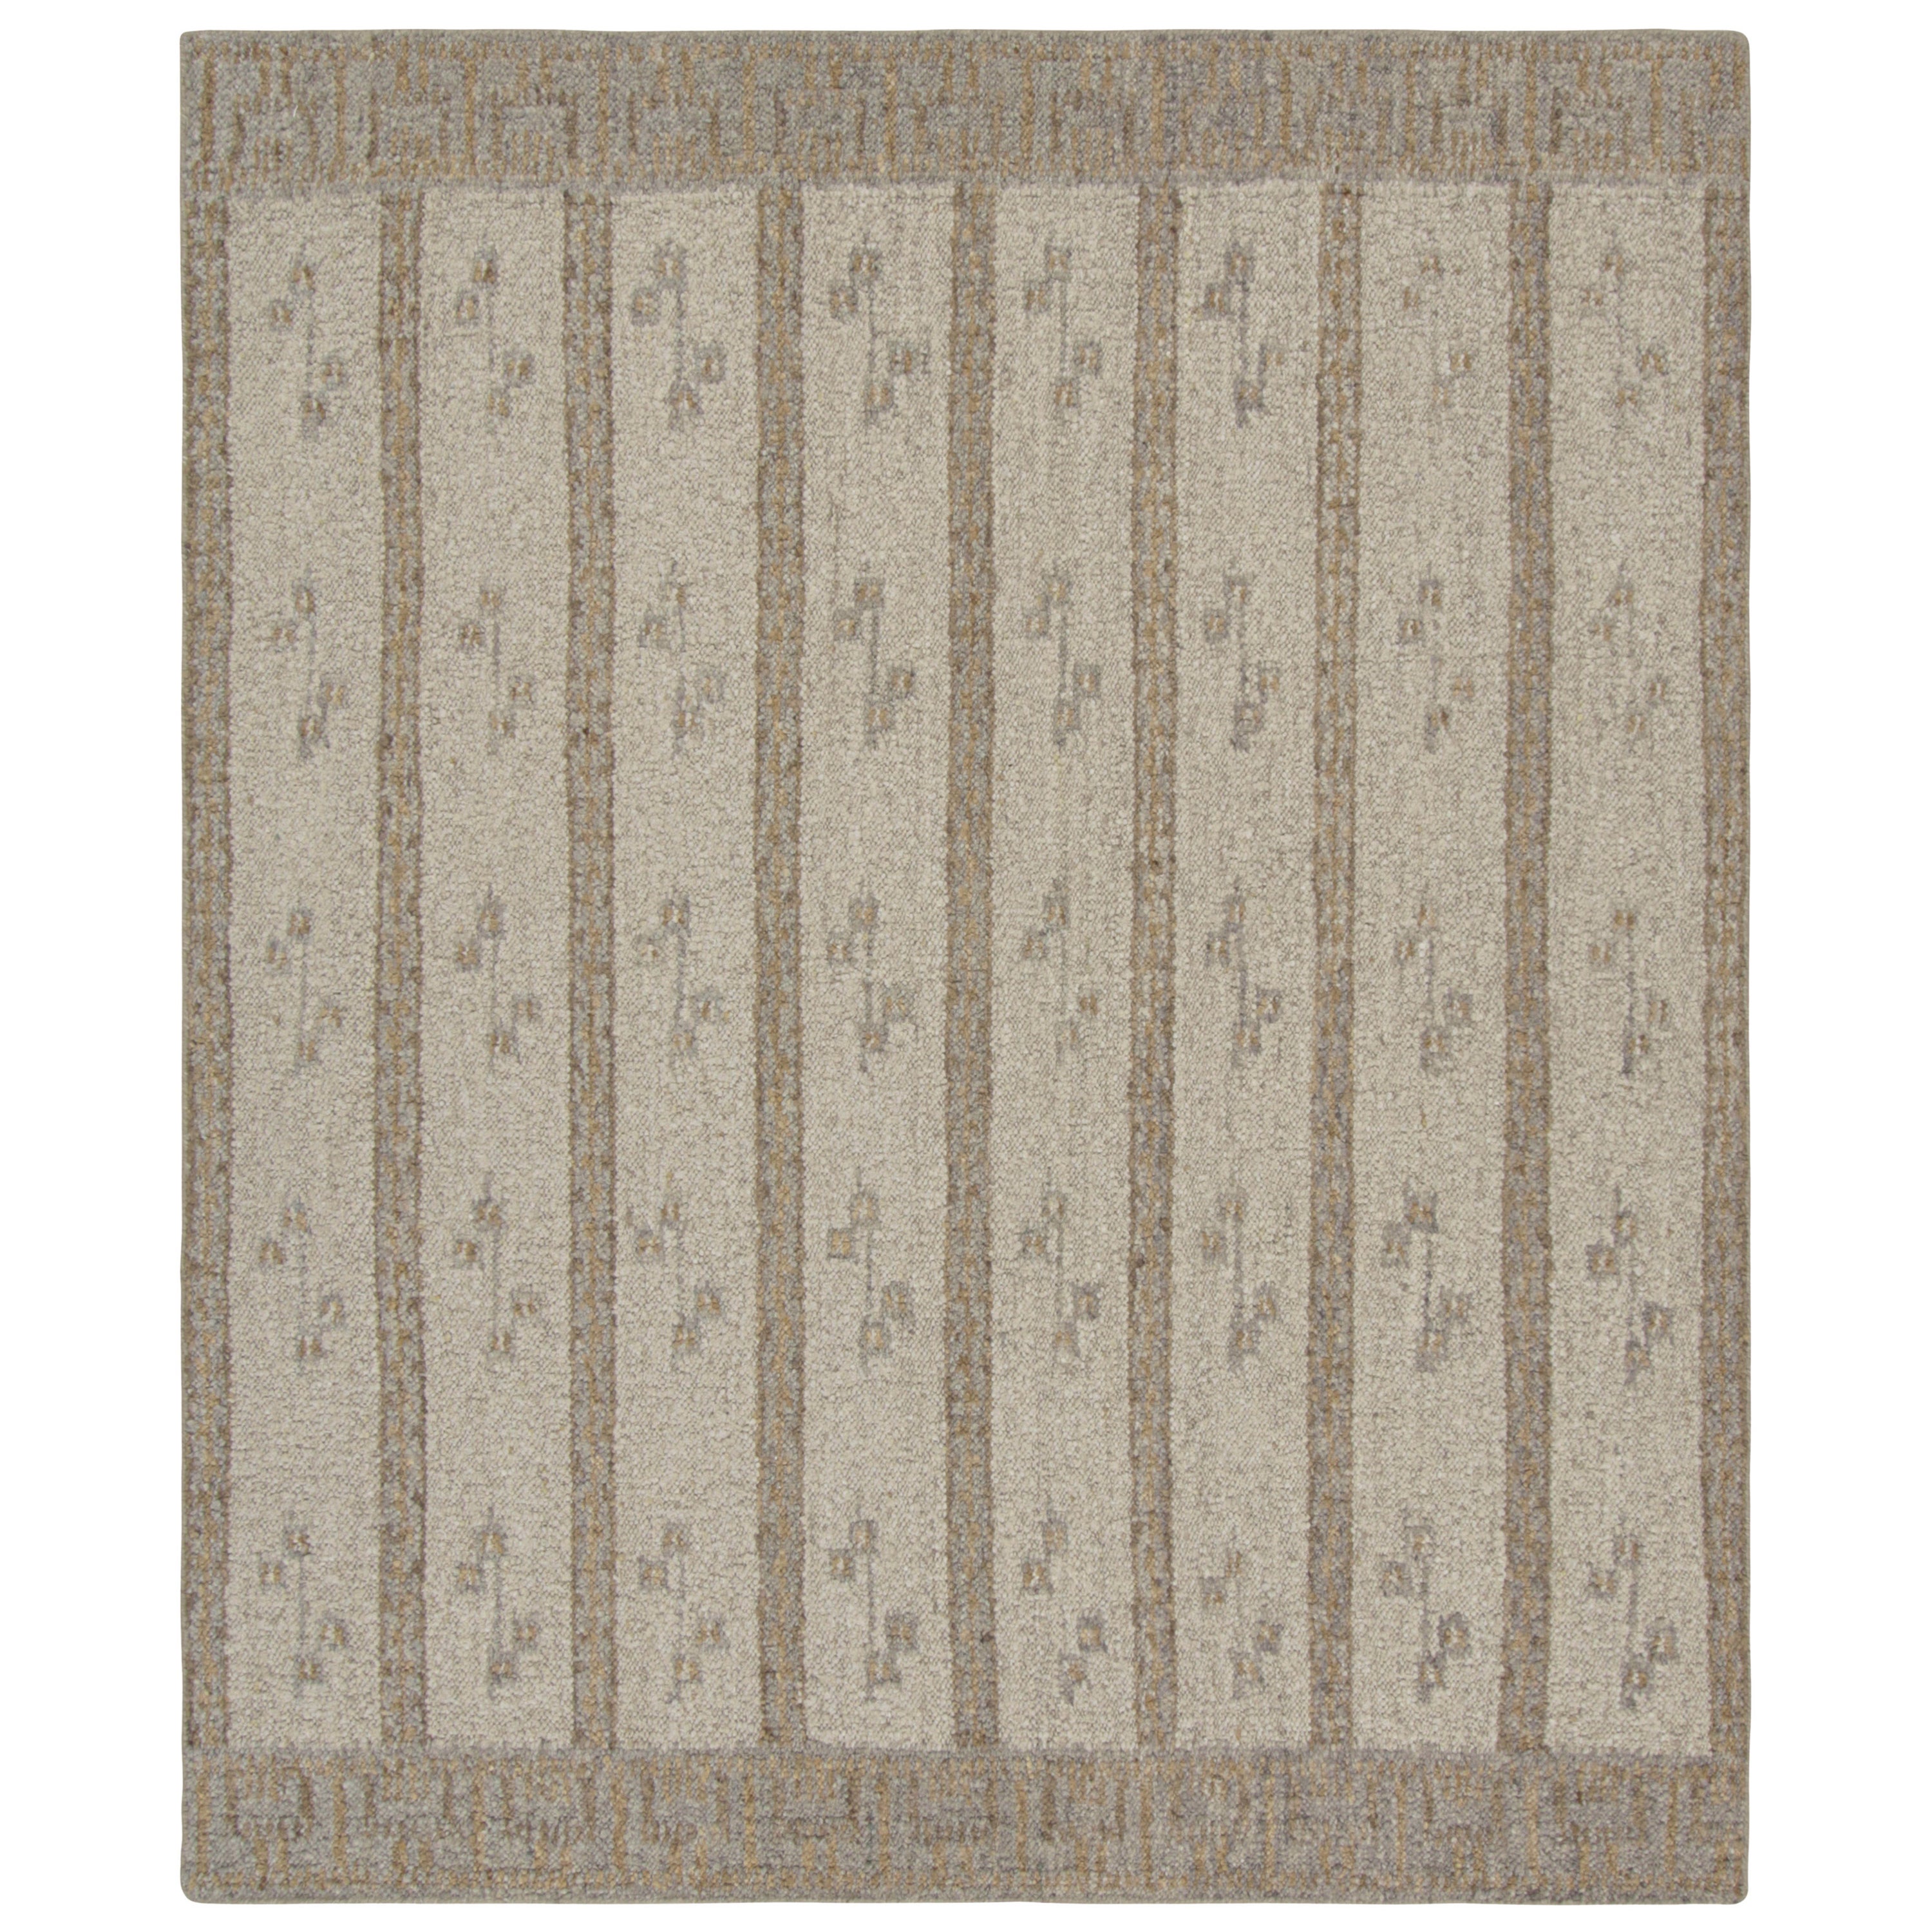 Rug & Kilim’s Scandinavian Style Rug in White & Beige-Brown Stripes and Geometry For Sale